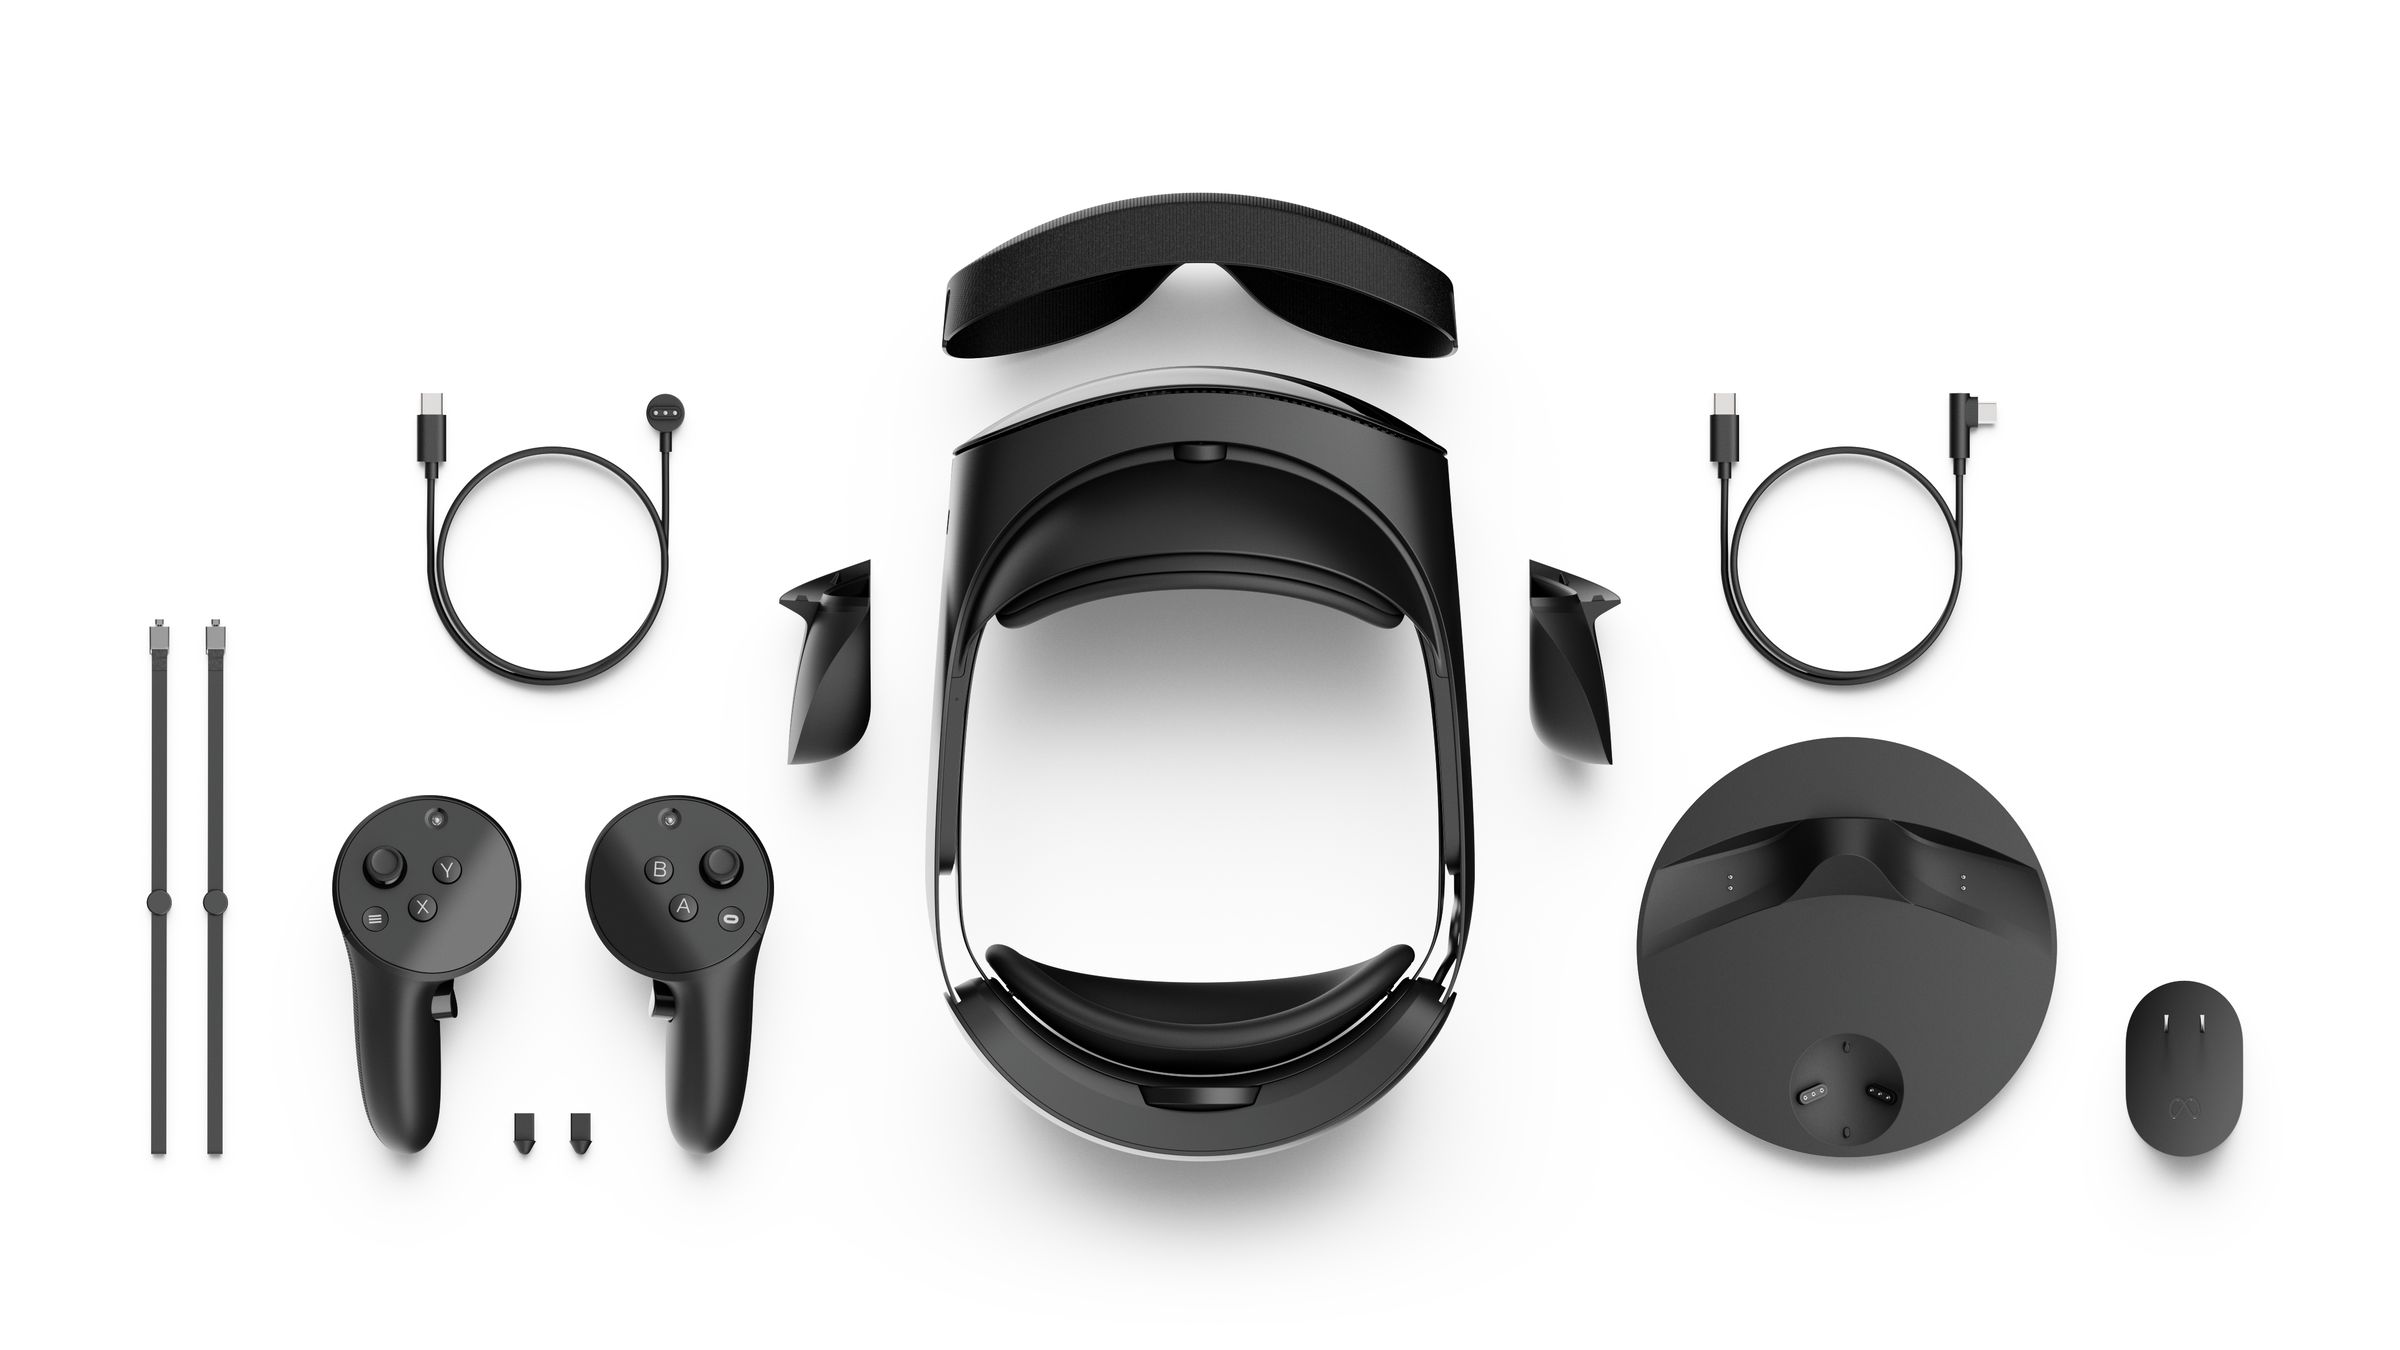 A picture of the Quest Pro’s accessories, including controllers, a charging dock, and optional face masks